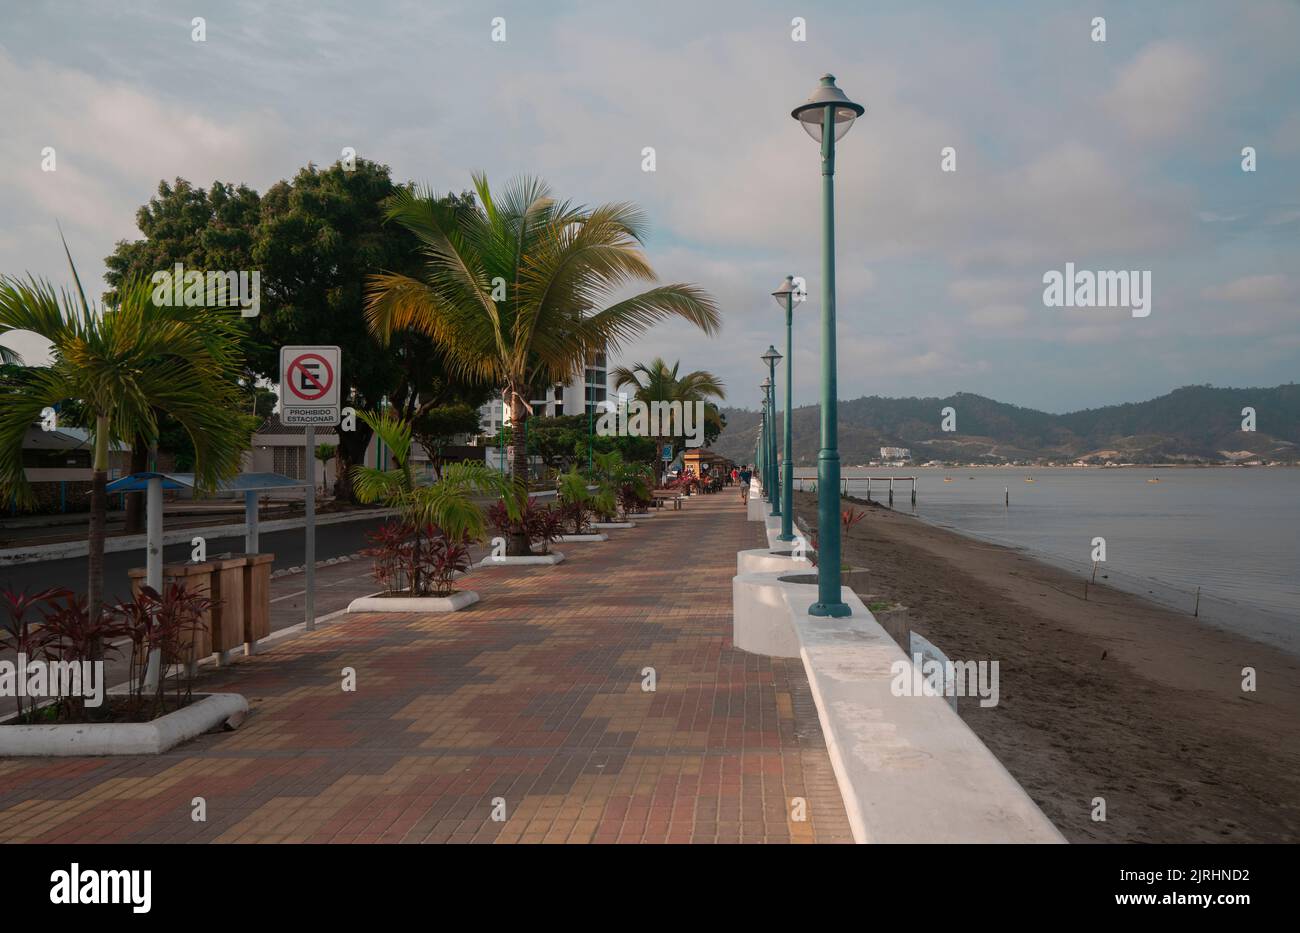 Bahia de Caraquez, Manabi / Ecuador - August 20 2022: People walking on the boardwalk of the city next to the beach on a cloudy day Stock Photo